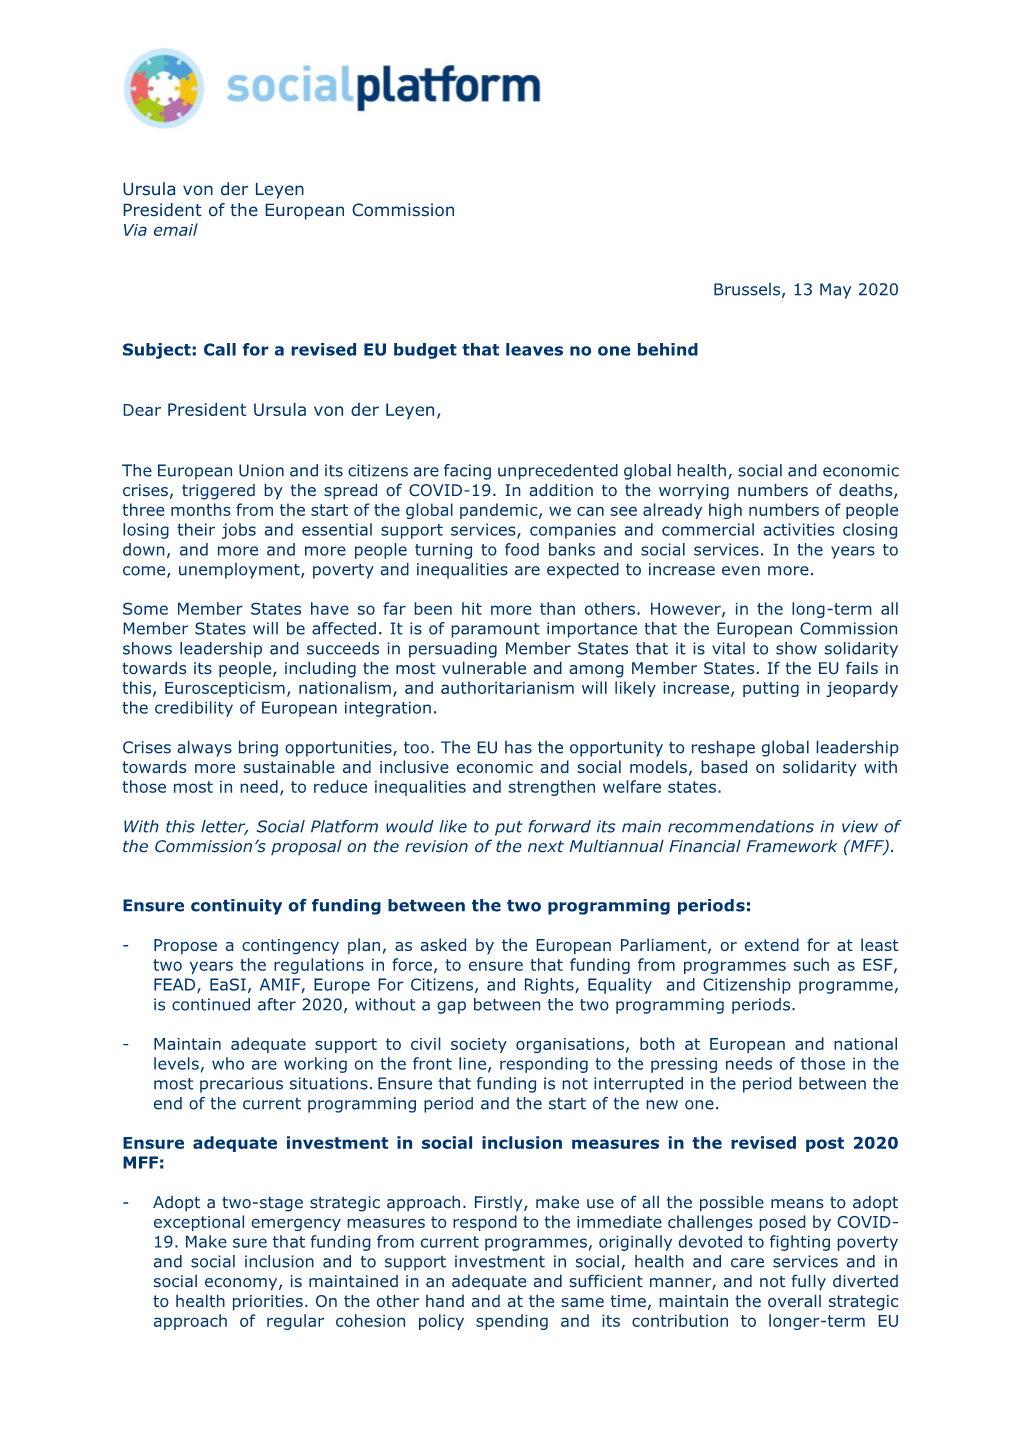 Ursula Von Der Leyen President of the European Commission Via Email Brussels, 13 May 2020 Subject: Call for a Revised EU Budget